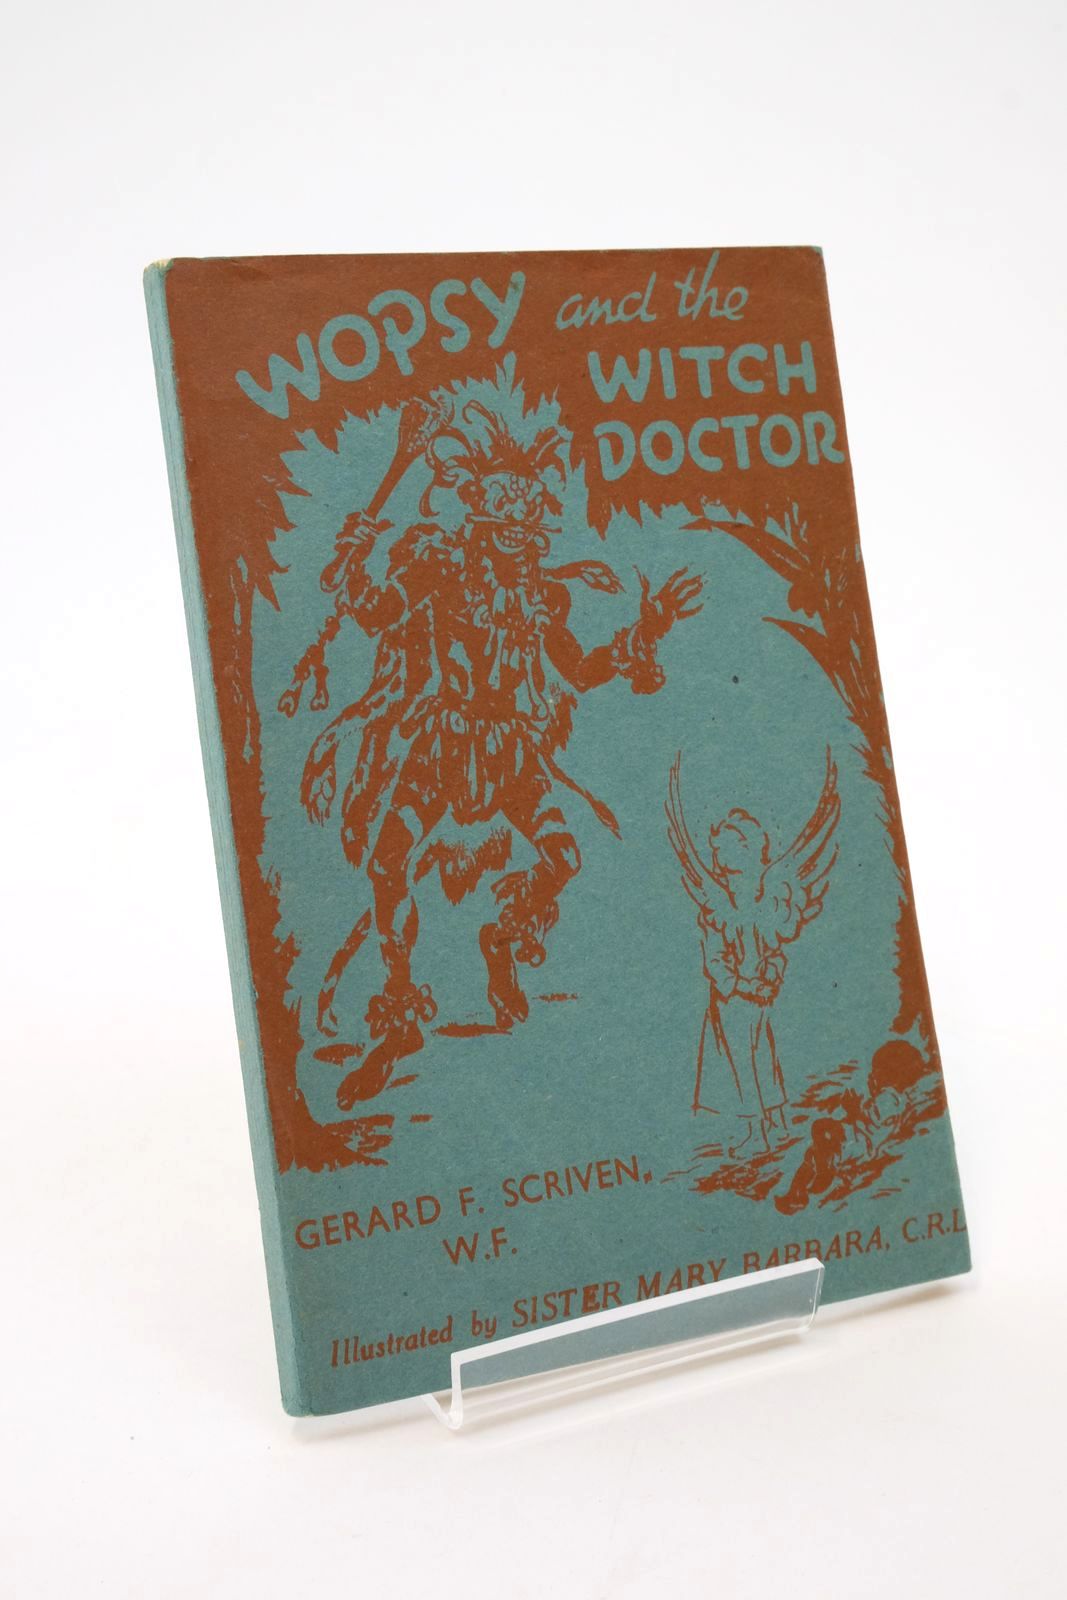 Photo of WOPSY AND THE WITCH DOCTOR written by Scriven, Gerard F. illustrated by Barbara, Sister Mary published by Samuel Walker Ltd (STOCK CODE: 1322665)  for sale by Stella & Rose's Books